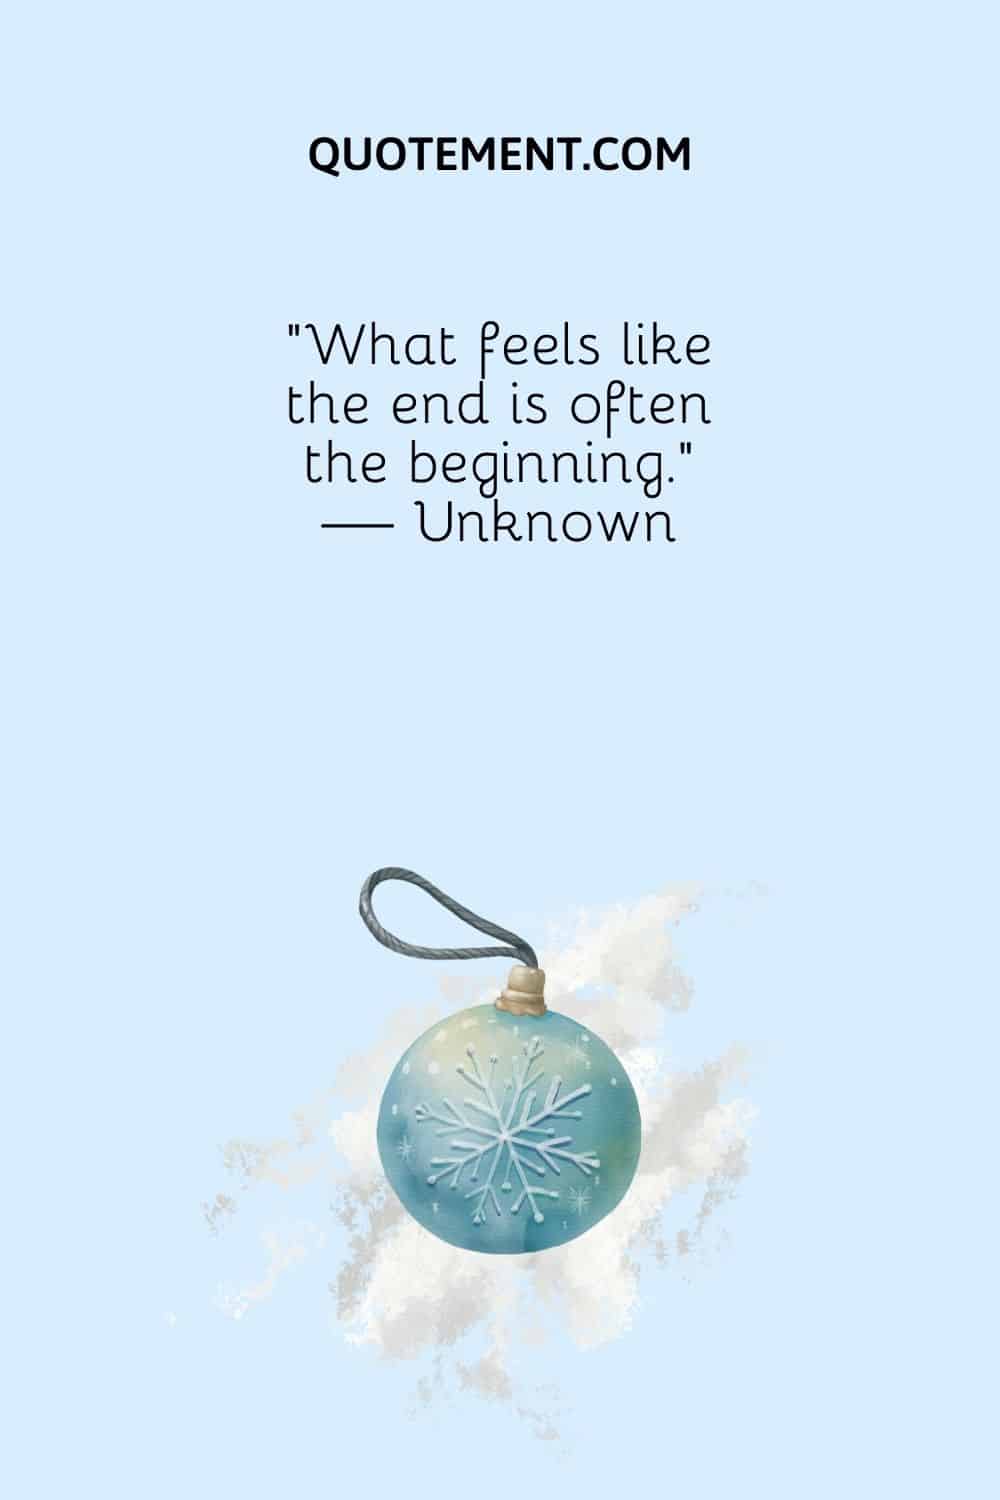 “What feels like the end is often the beginning.” — Unknown